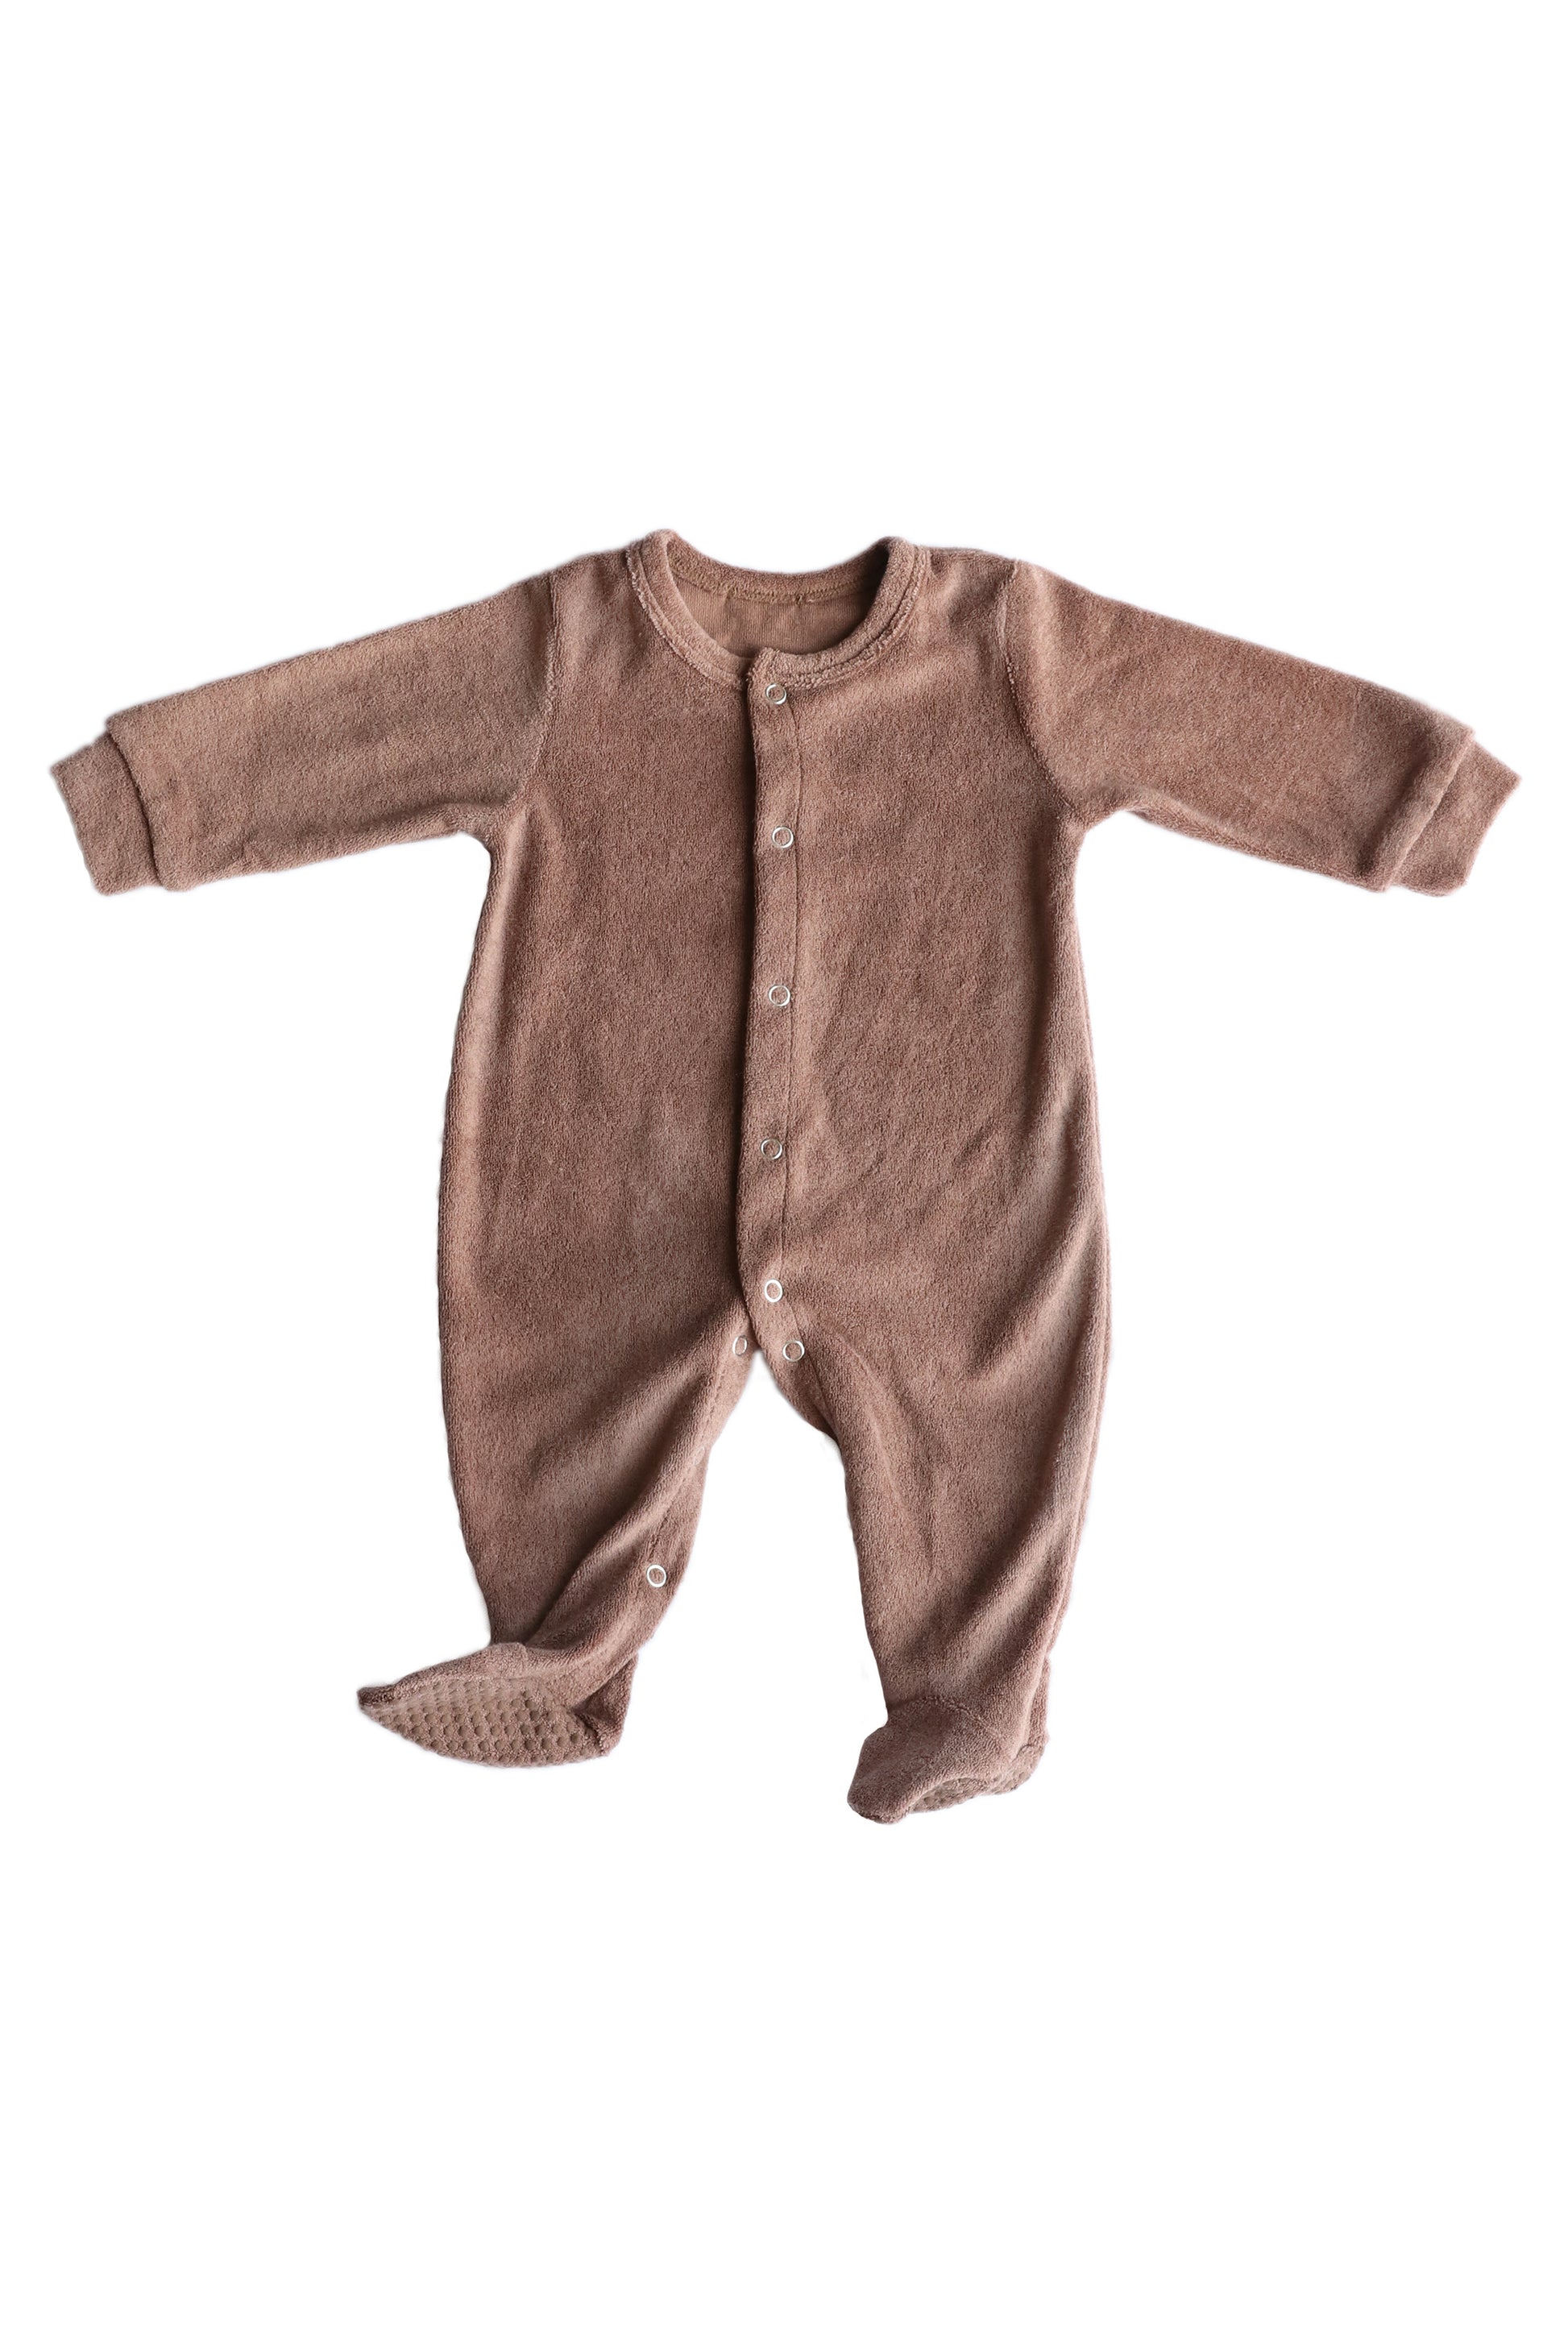 Terry Baby Sleeper  Gift shopping for infant essentials or creating a baby registry, you have found the best neutral tone unisex 100% cotton terry towel sleepsuit onesie. 